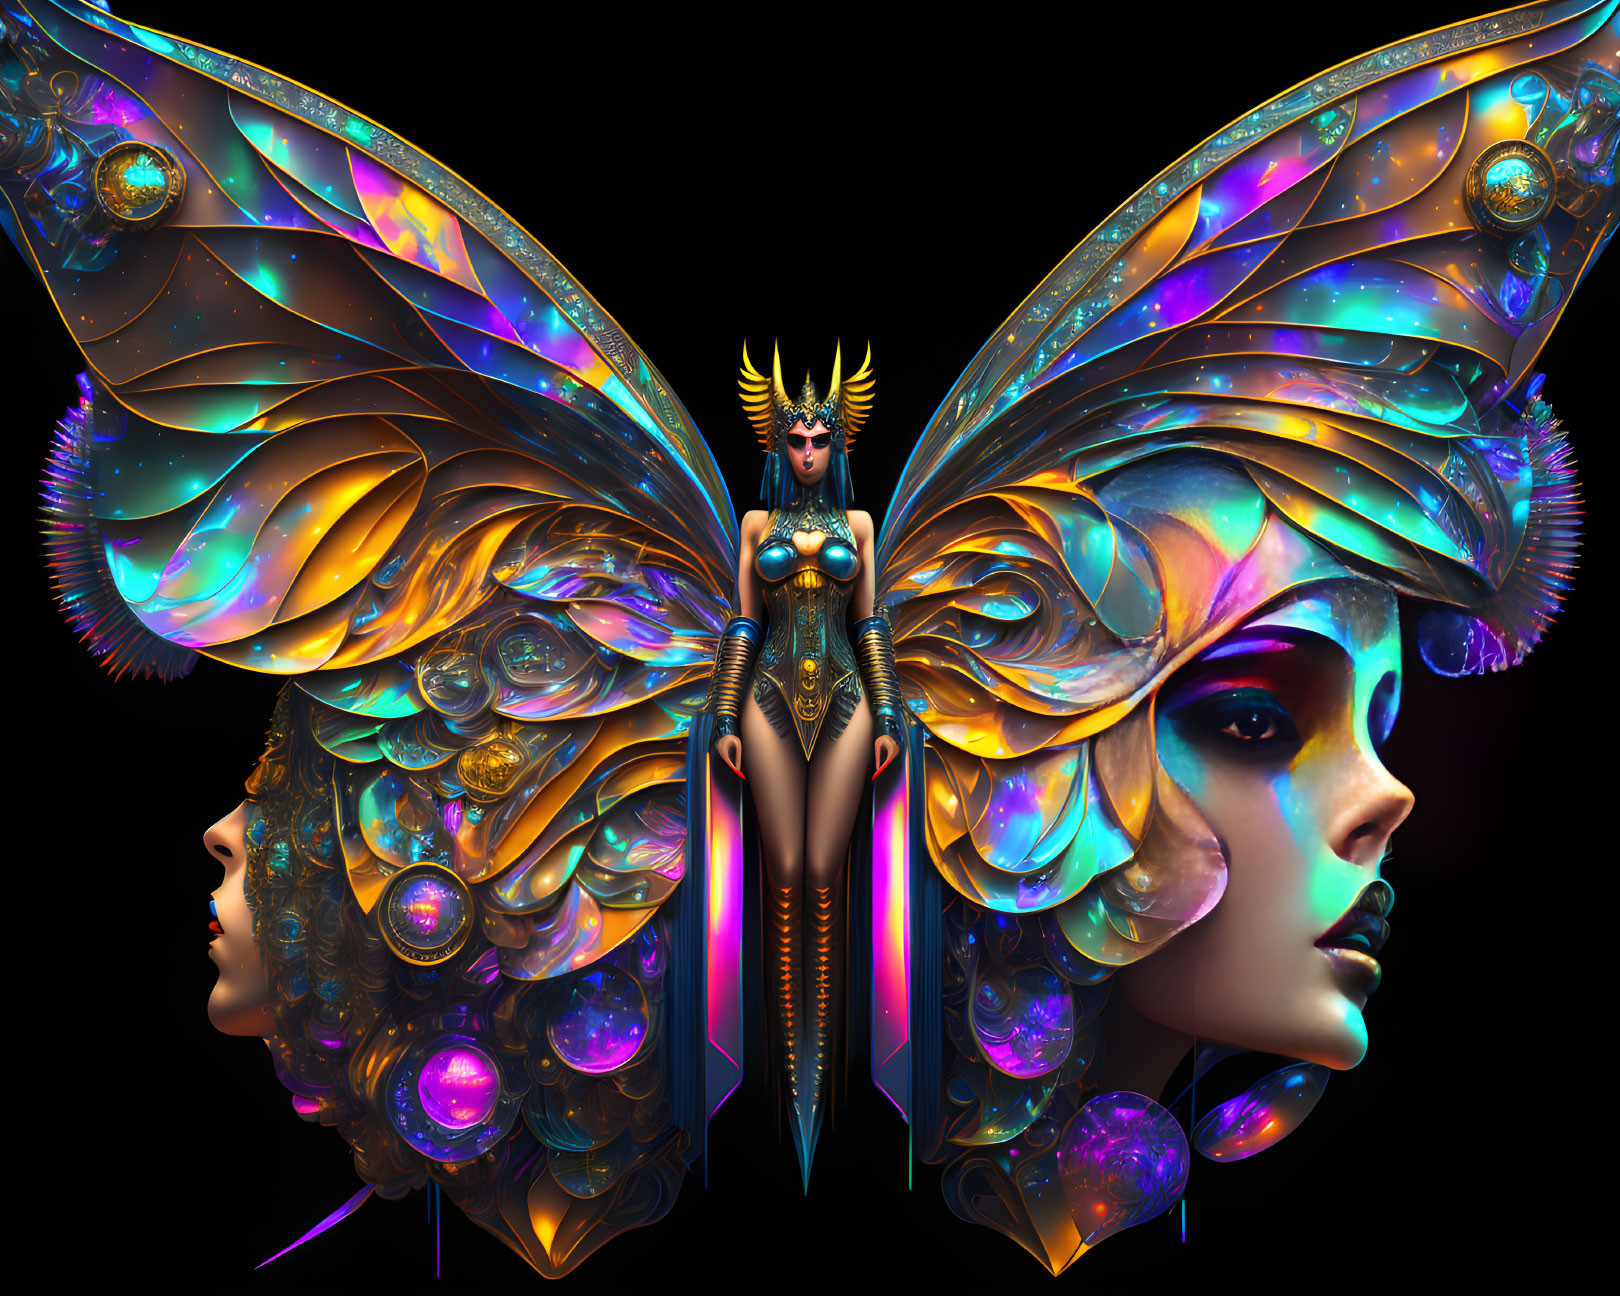 Digital Artwork: Central Character with Butterfly Wings and Ornate Headdresses